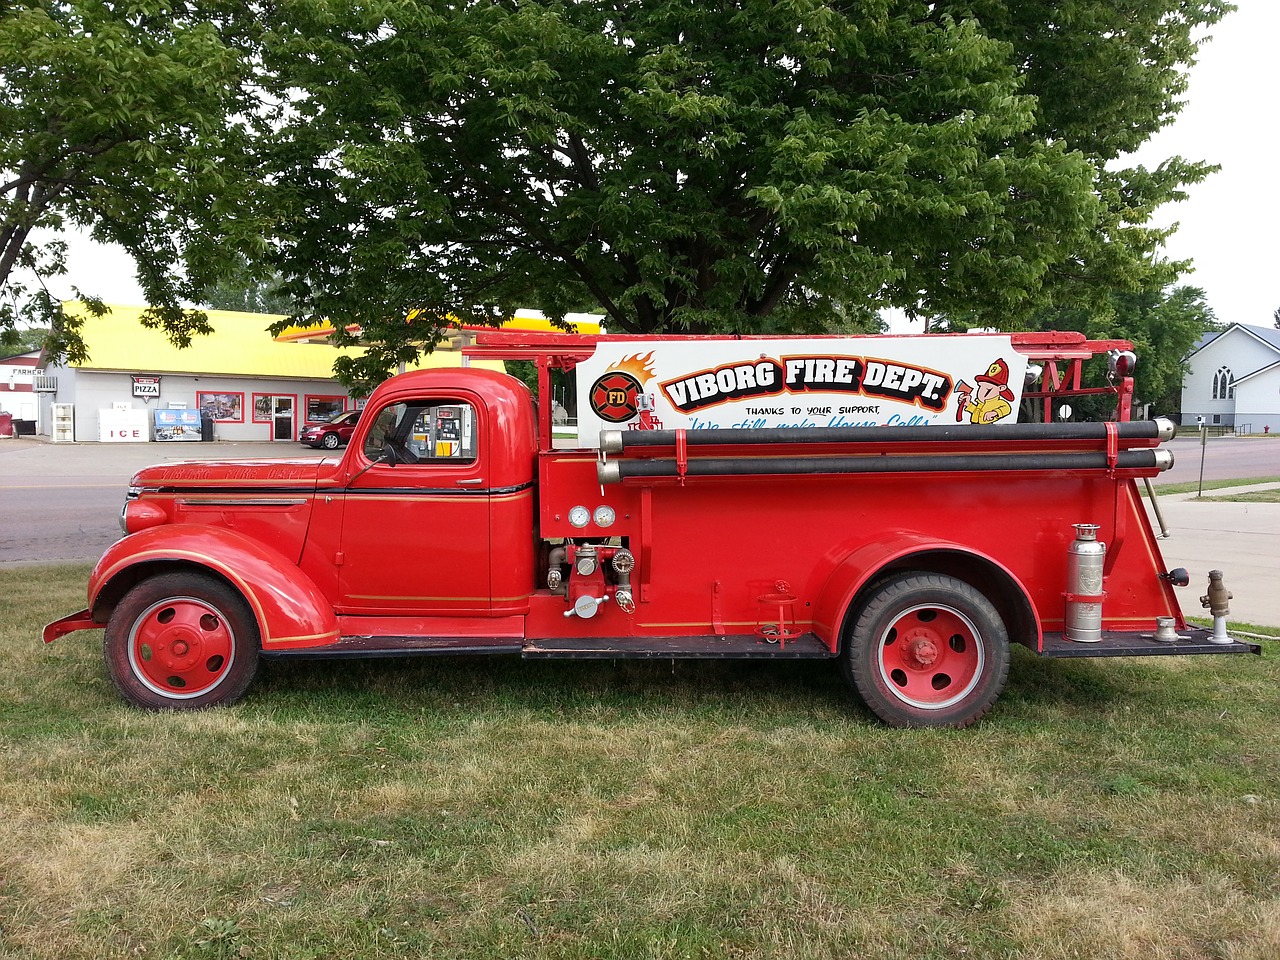 viborg fire department old fire truck free photo